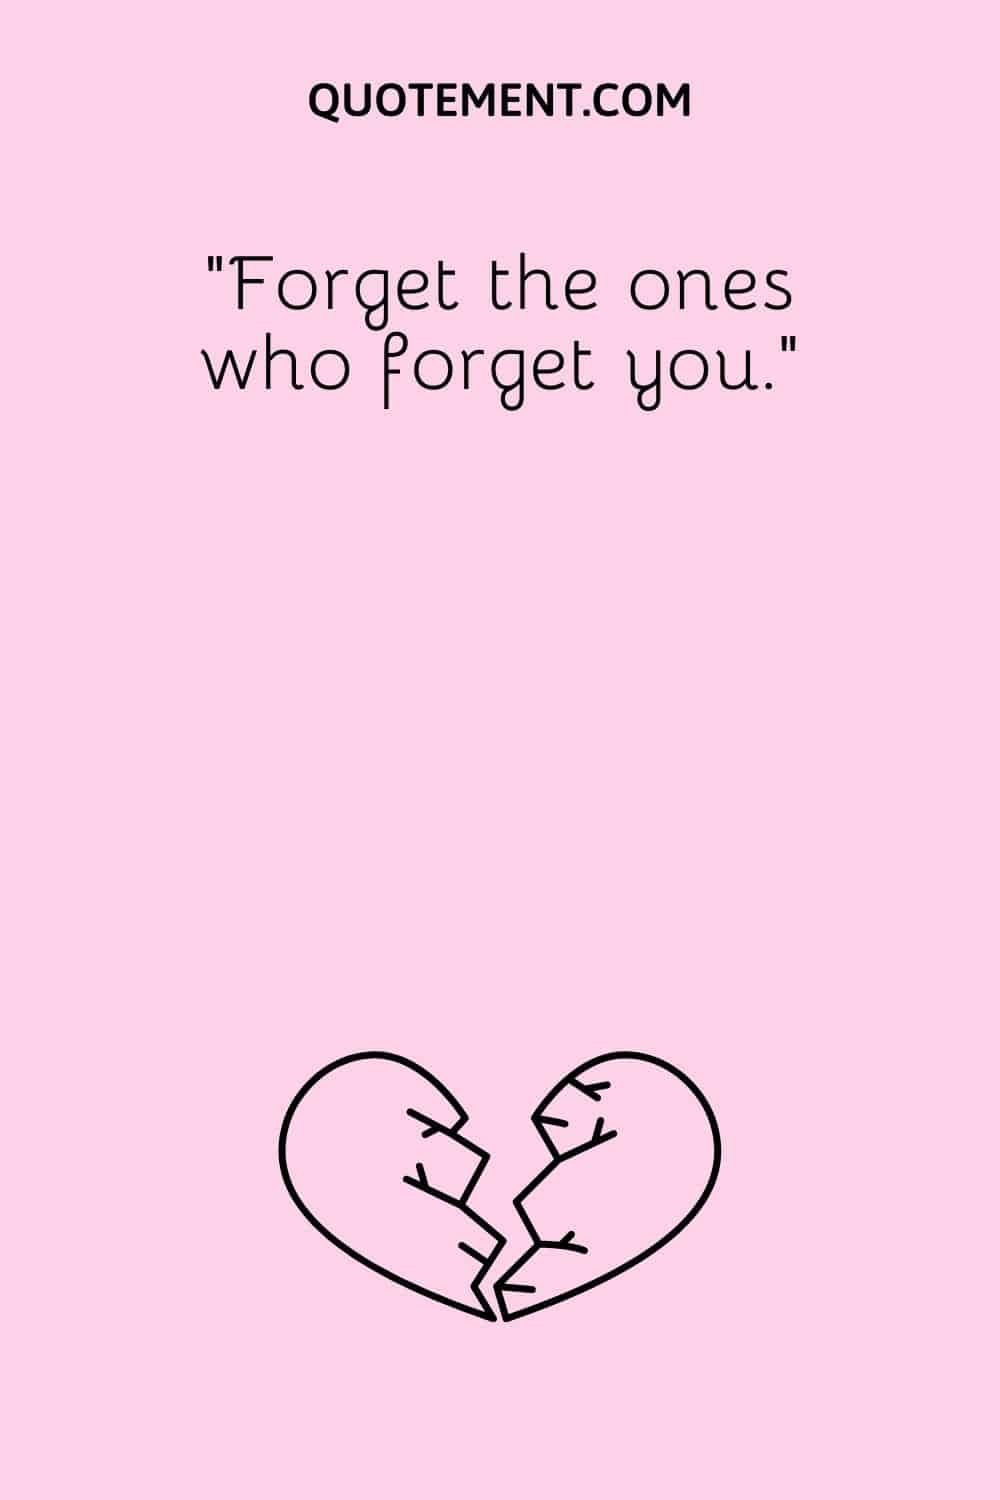 “Forget the ones who forget you.”